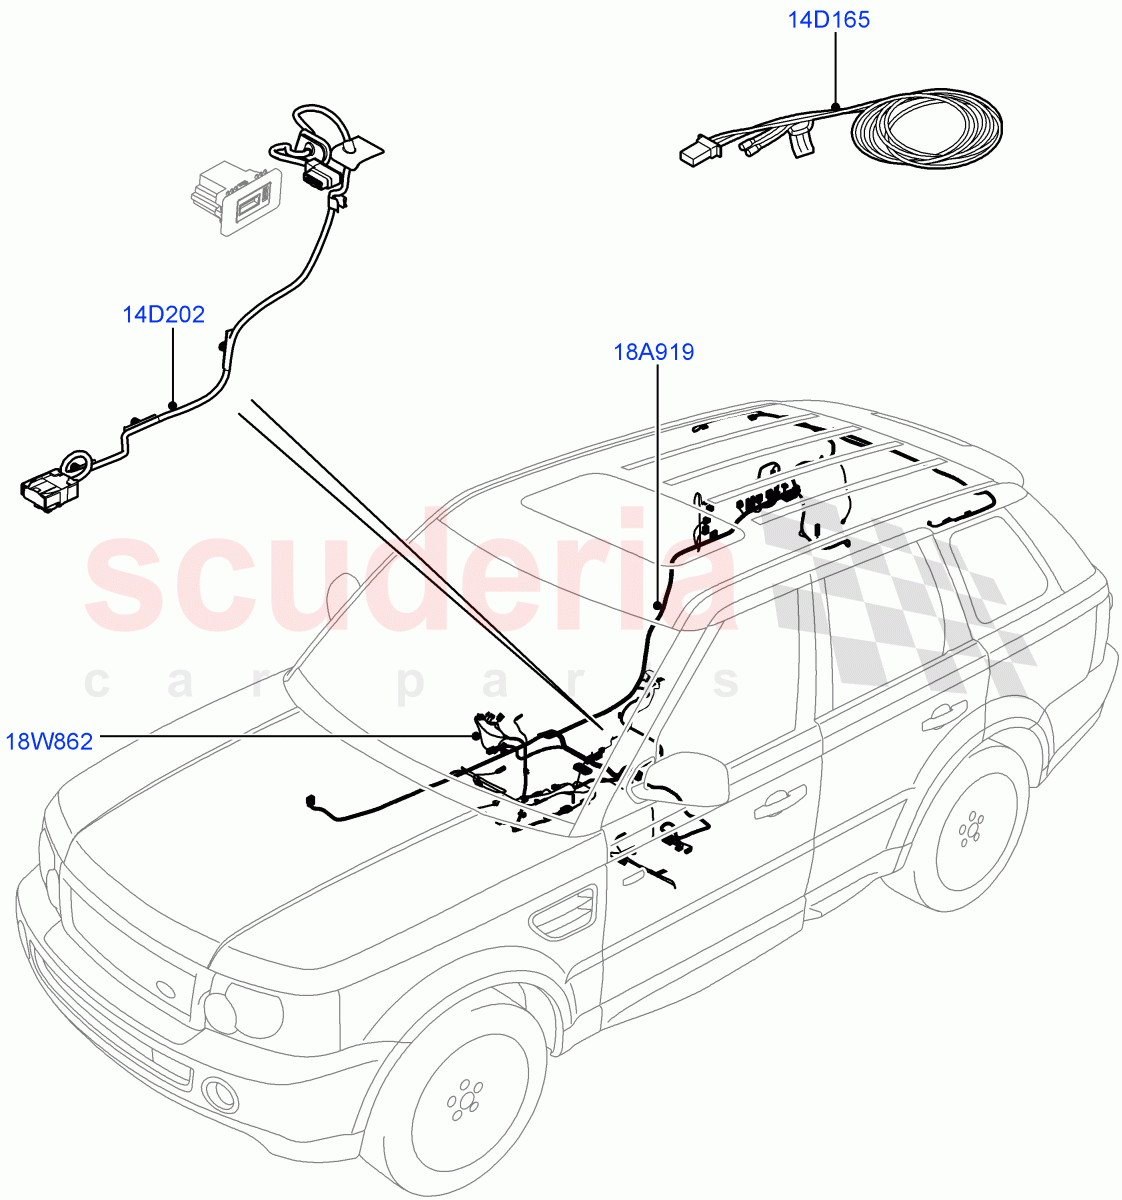 Electrical Wiring - Body And Rear(Audio/Navigation/Entertainment)((V)FROMBA000001,(V)TOBA999999) of Land Rover Land Rover Range Rover Sport (2010-2013) [3.0 Diesel 24V DOHC TC]